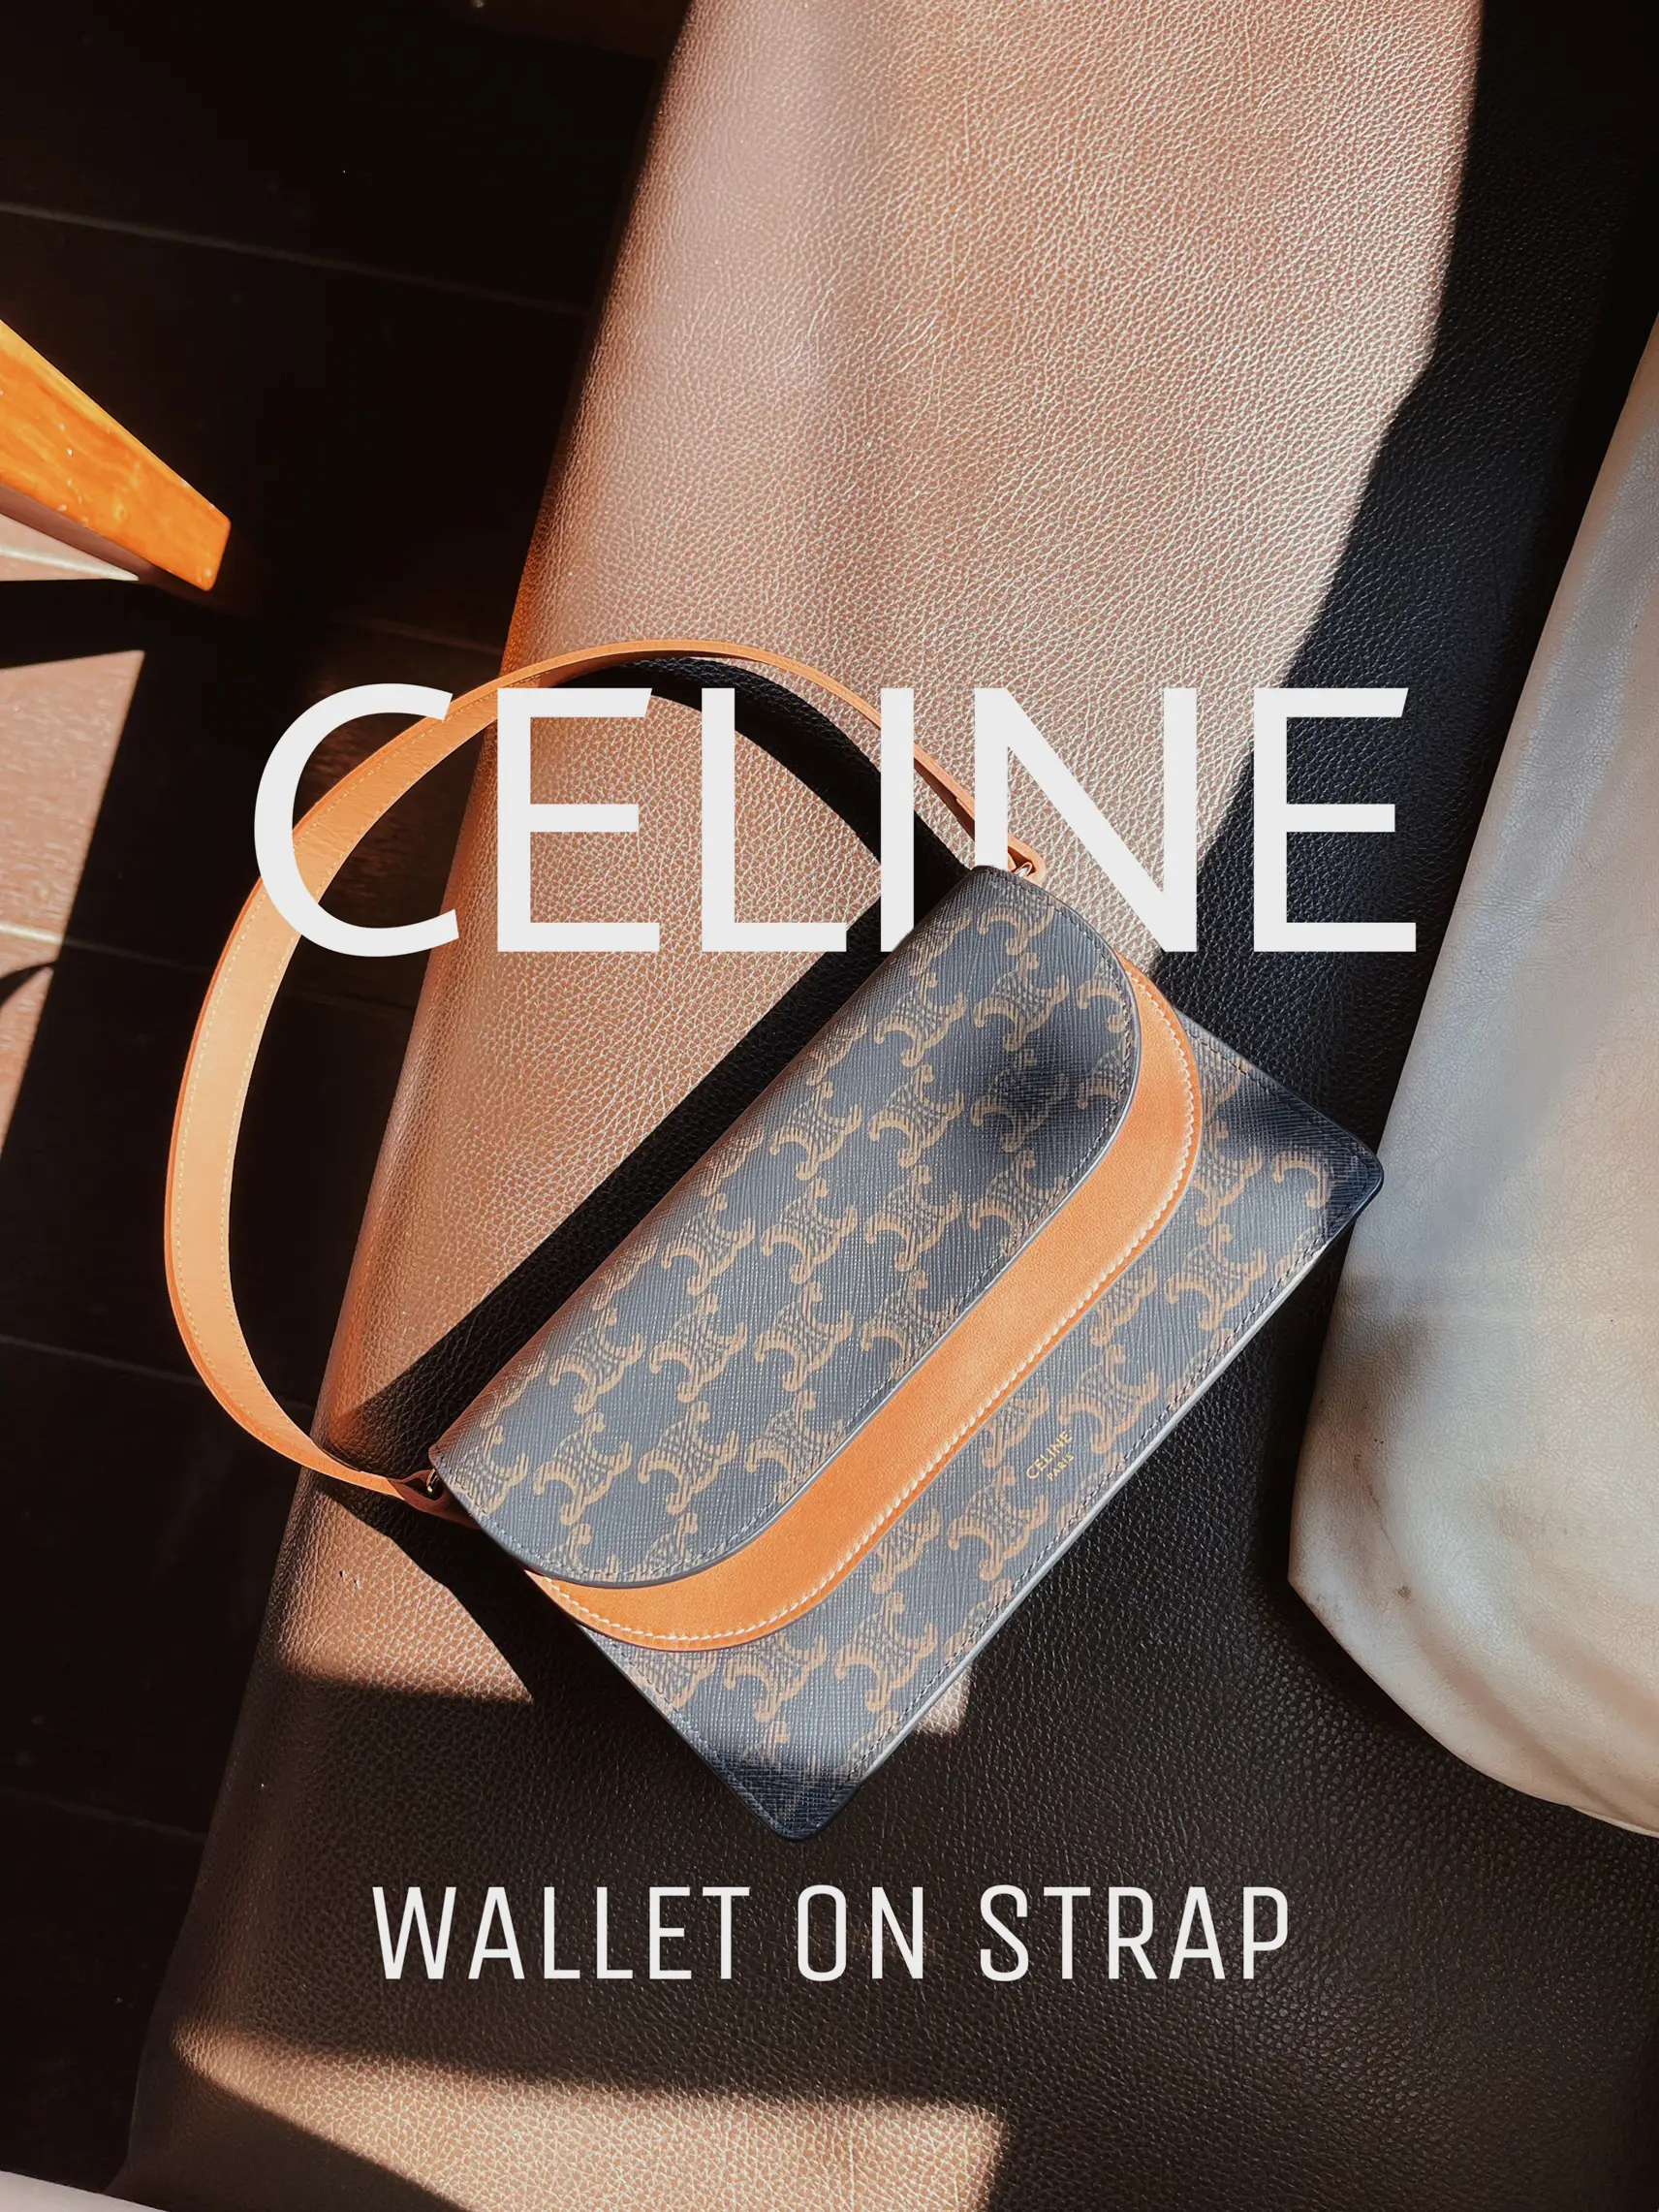 Review💫Celine wallet on strap, Gallery posted by ˚ ༘ ♡LP⋆｡˚